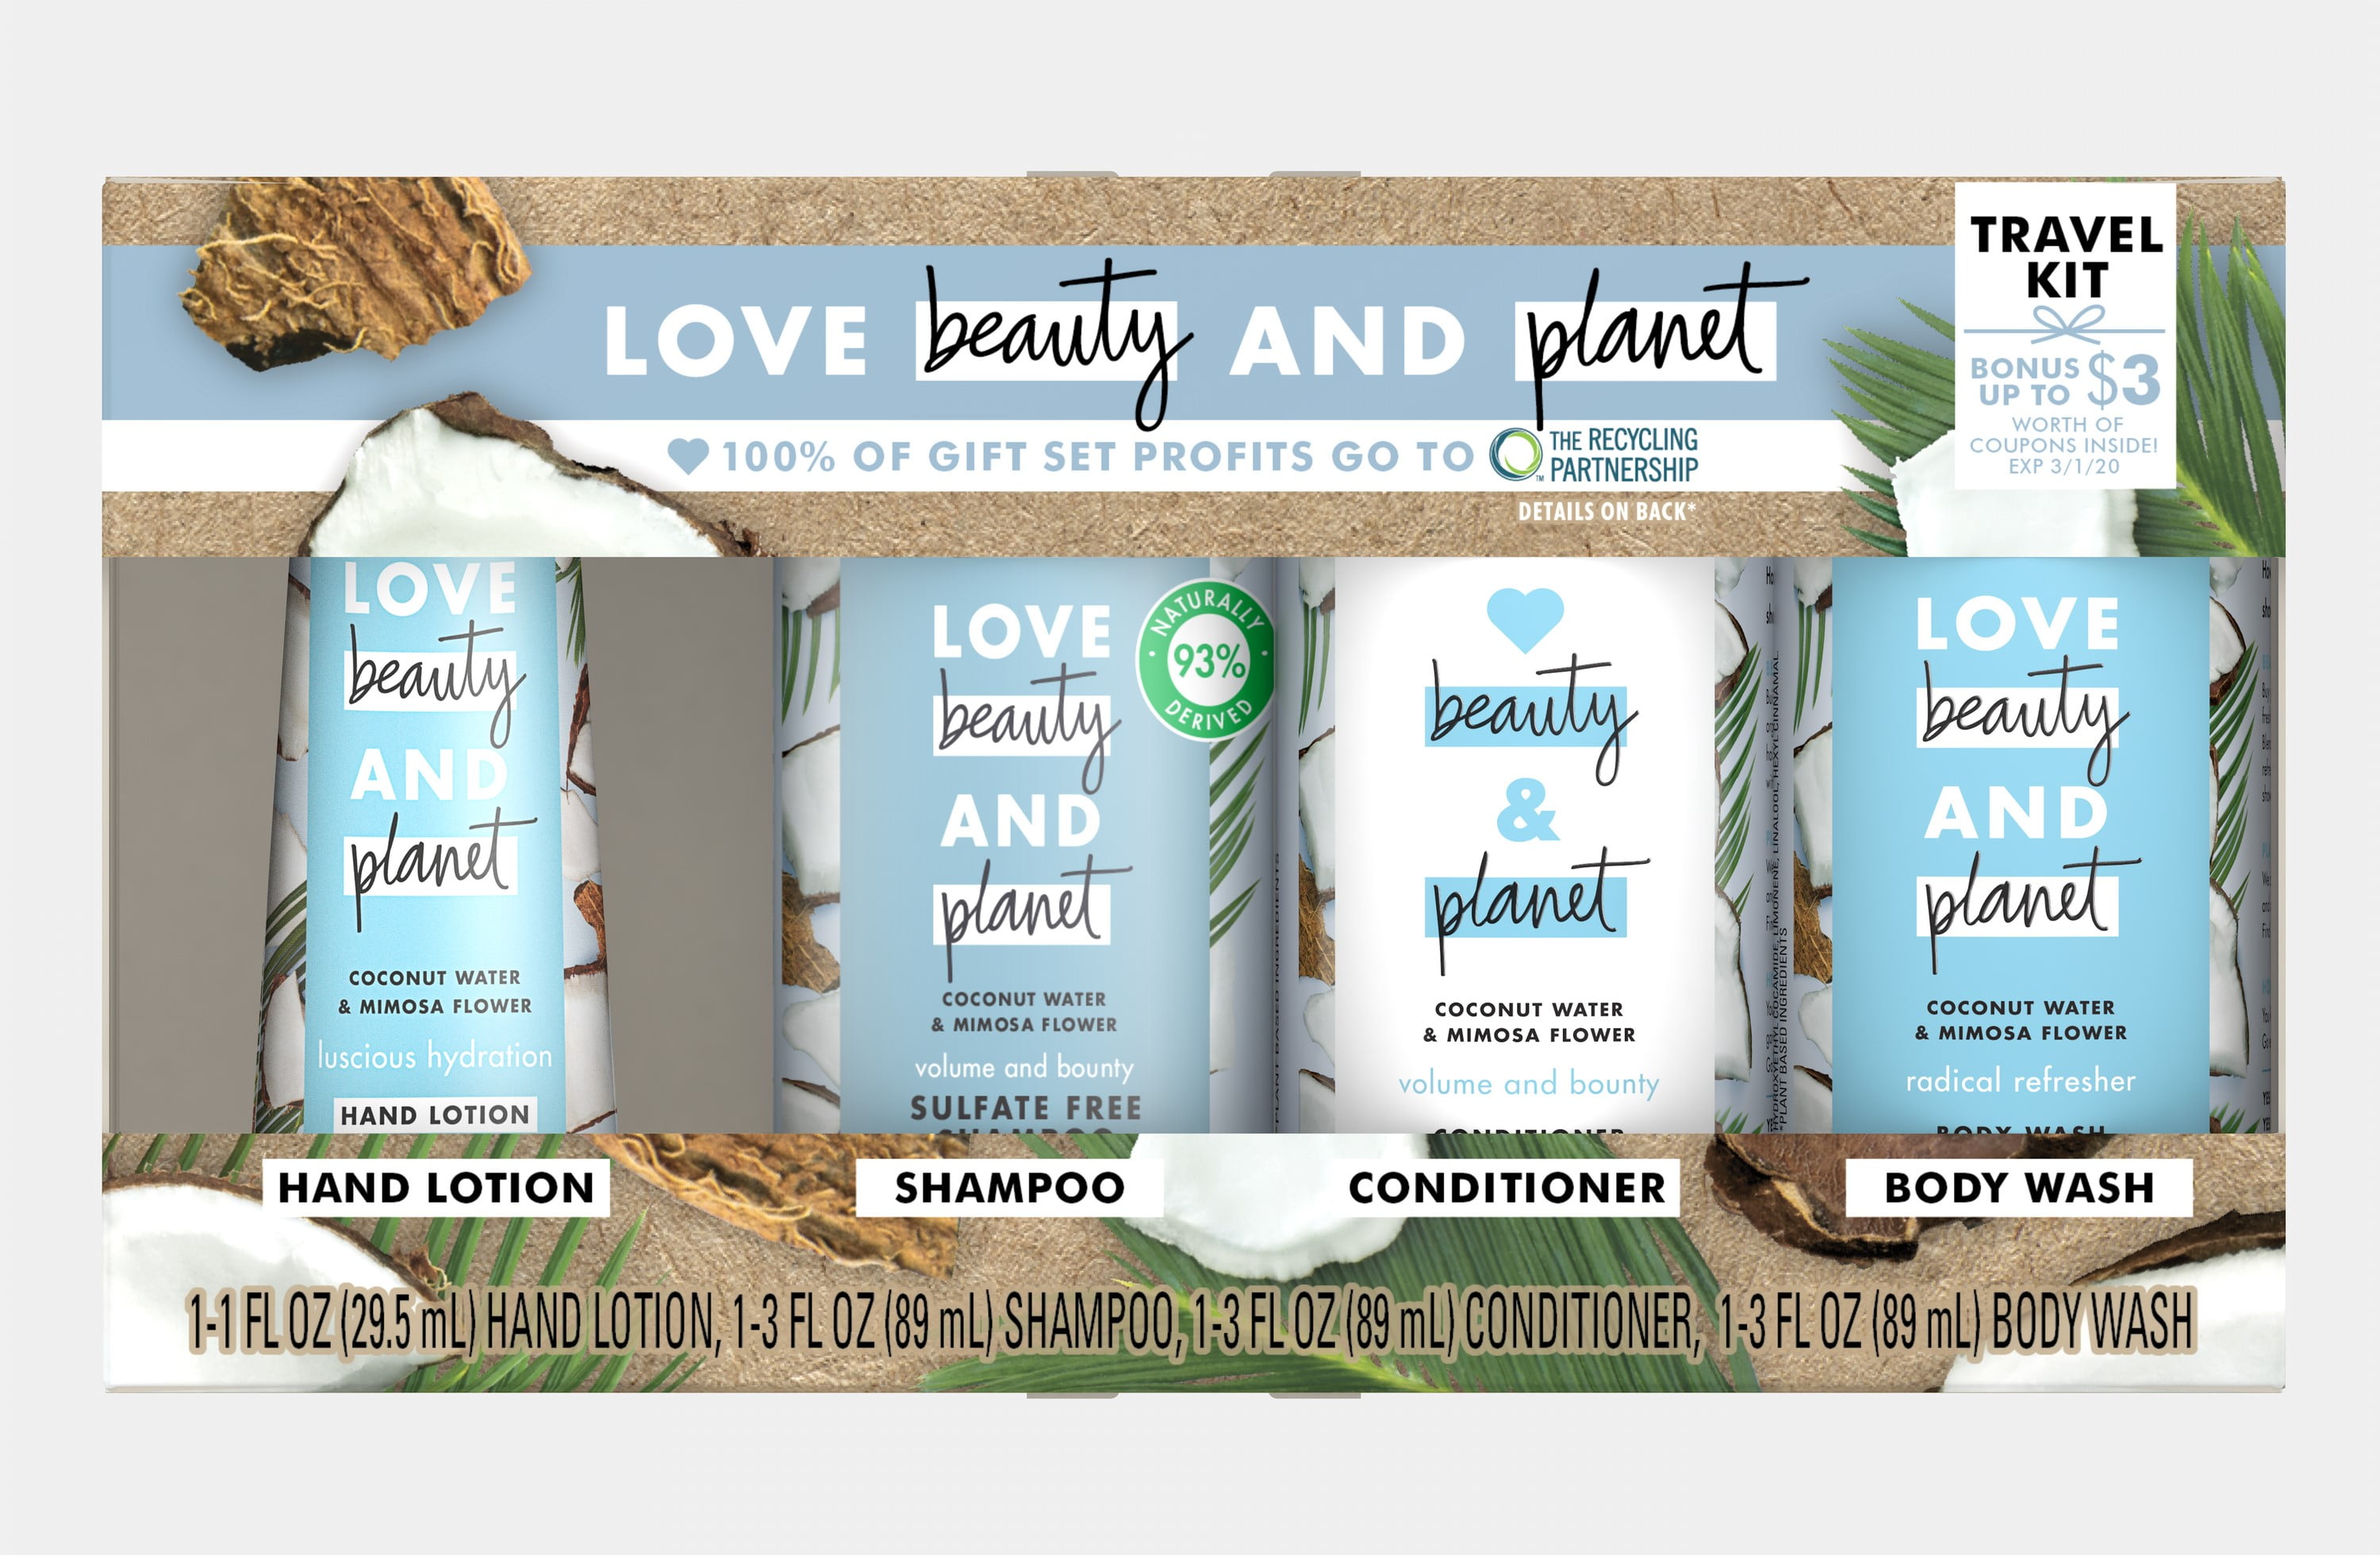 Love Beauty And Planet 4 Pc Coconut Water Mimosa Flower Holiday